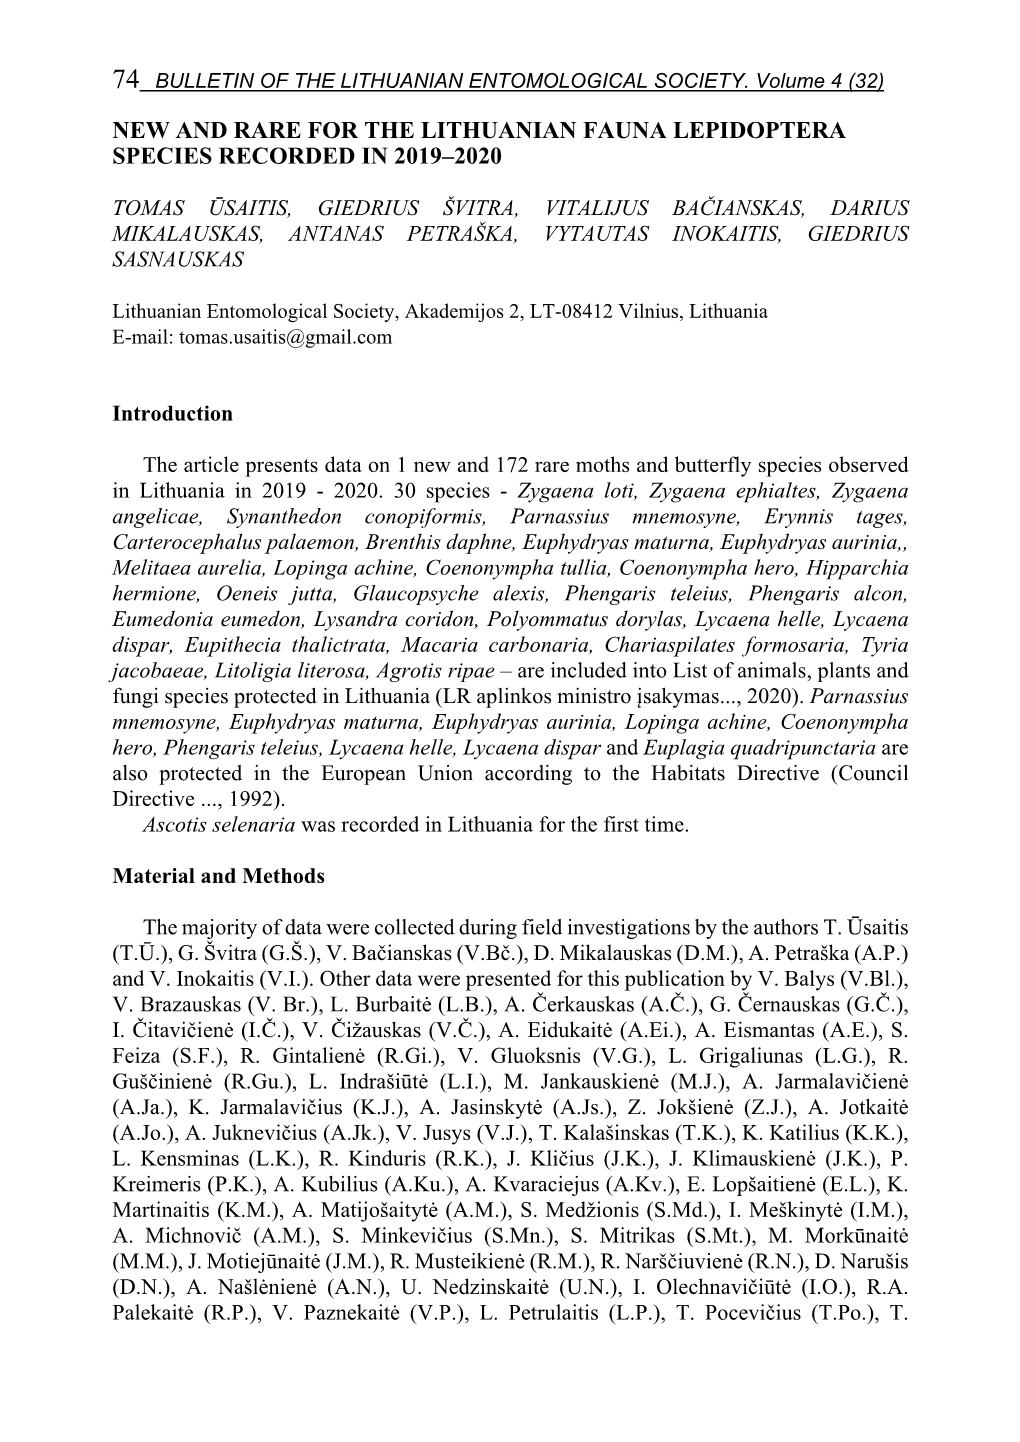 New and Rare for the Lithuanian Fauna Lepidoptera Species Recorded in 2019–2020